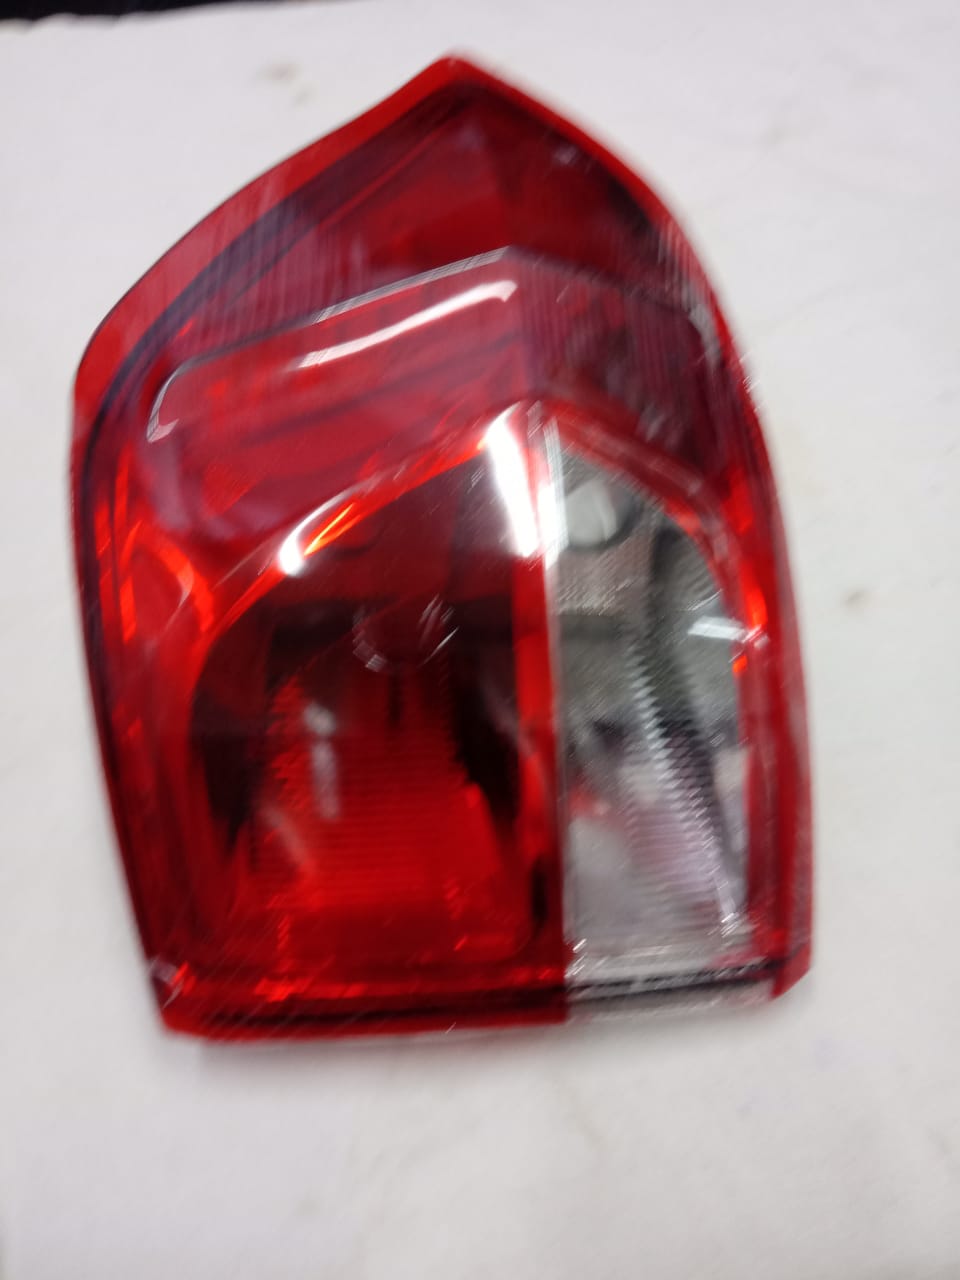 Tail Lamp Ecosports Left Side   Tail Lamp Ecosports Left Side